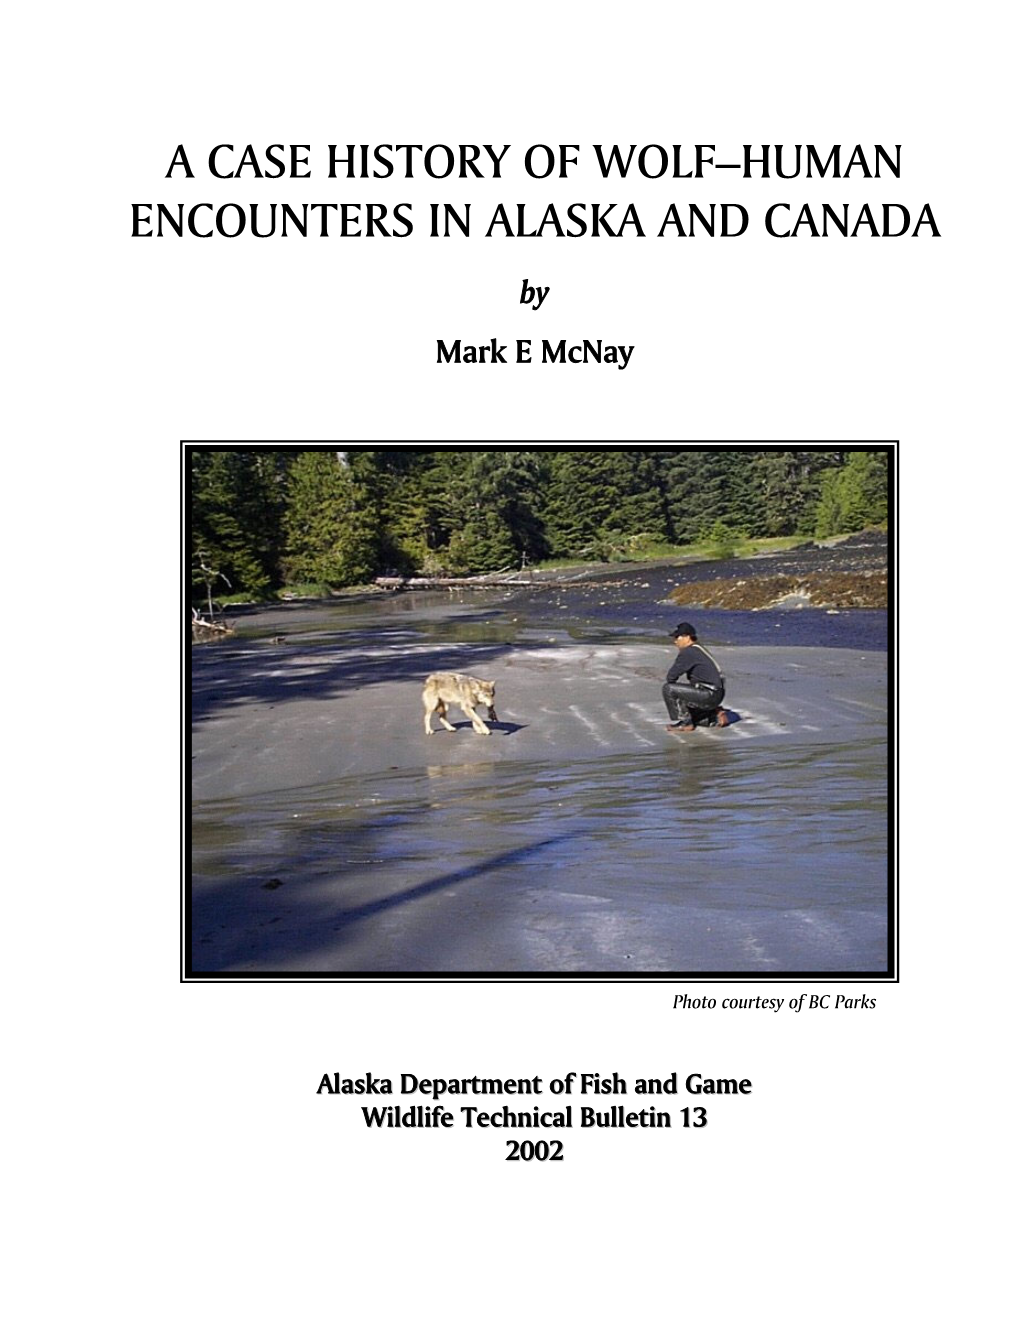 A Case History of Wolf-Human Encounters in Alaska and Canada